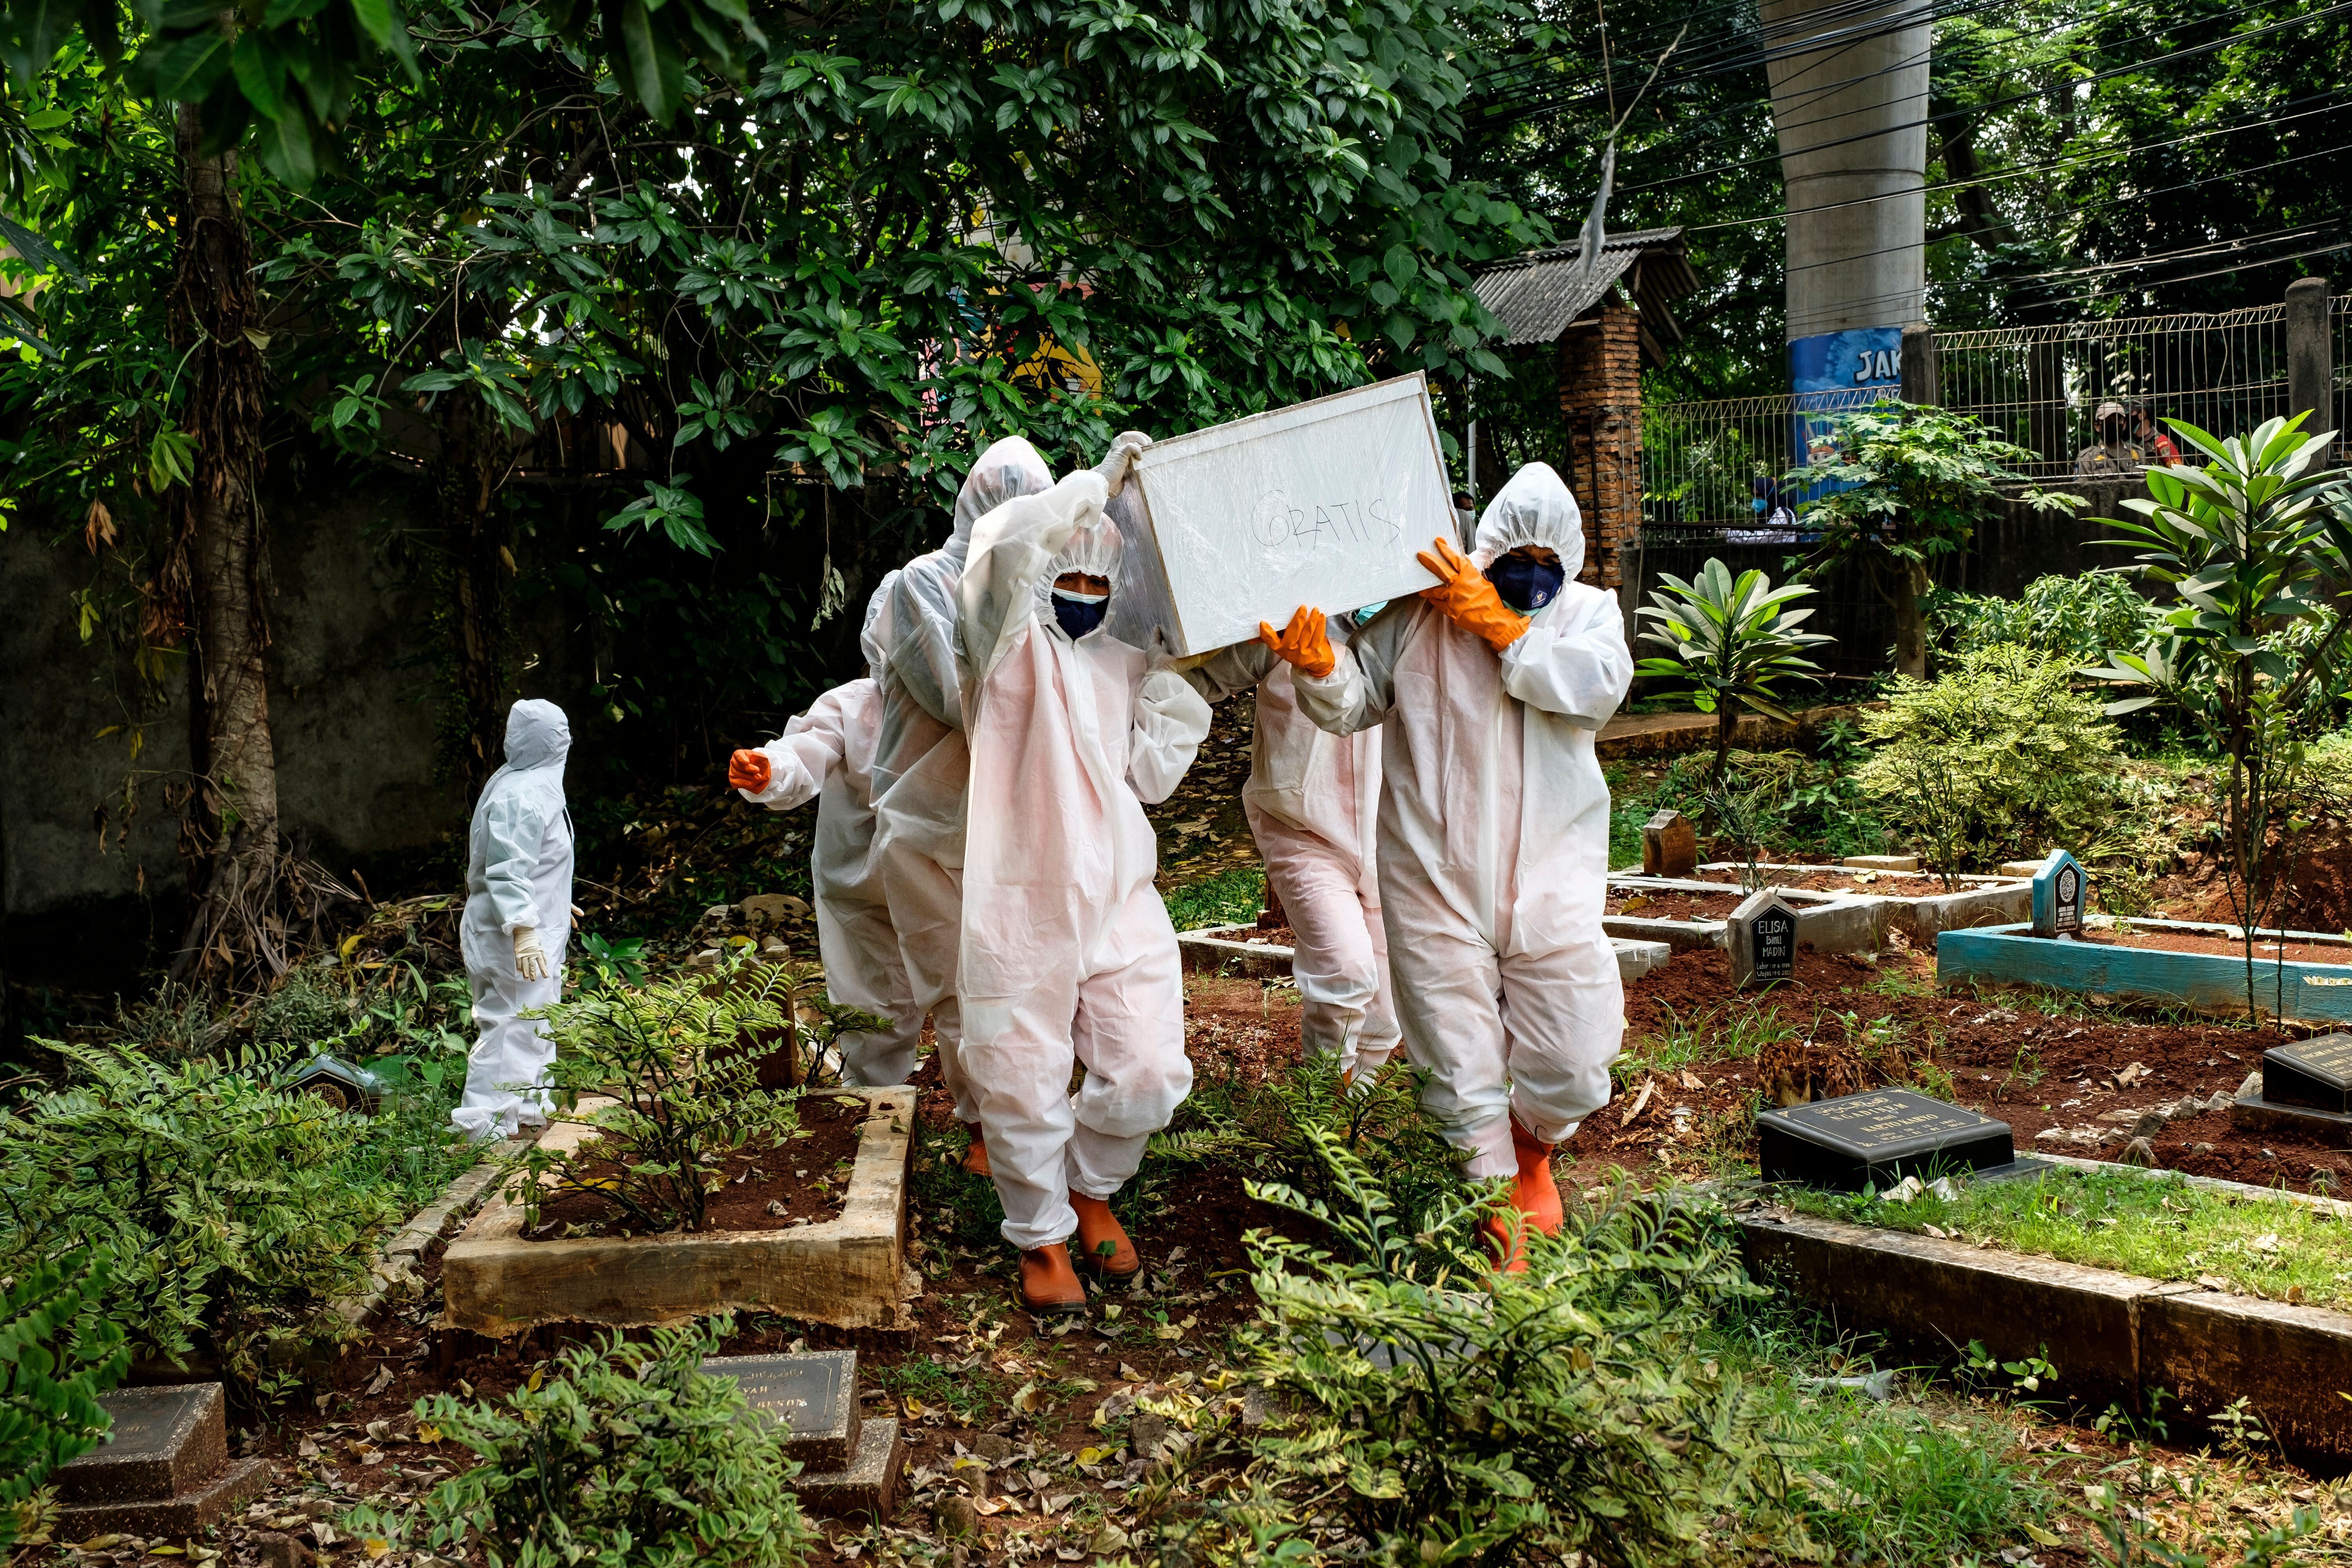 Health workers carry a casket containing the body of a suspected victim of COVID-19, who died at home in Jakarta, Indonesia.